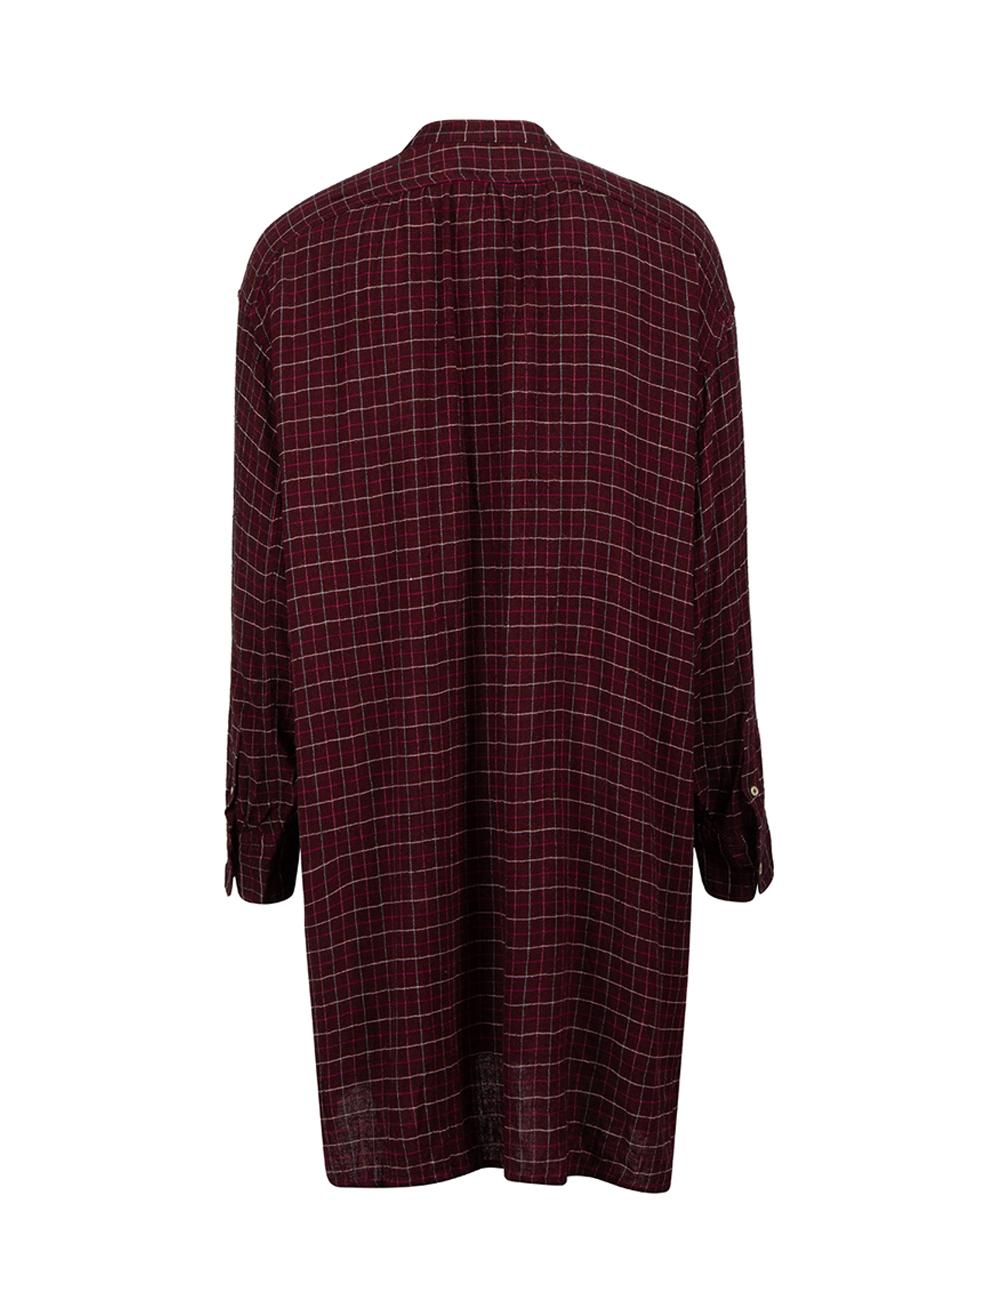 Isabel Marant Étoile Burgundy Check Print Shirt Mini Dress Size M In Good Condition For Sale In London, GB